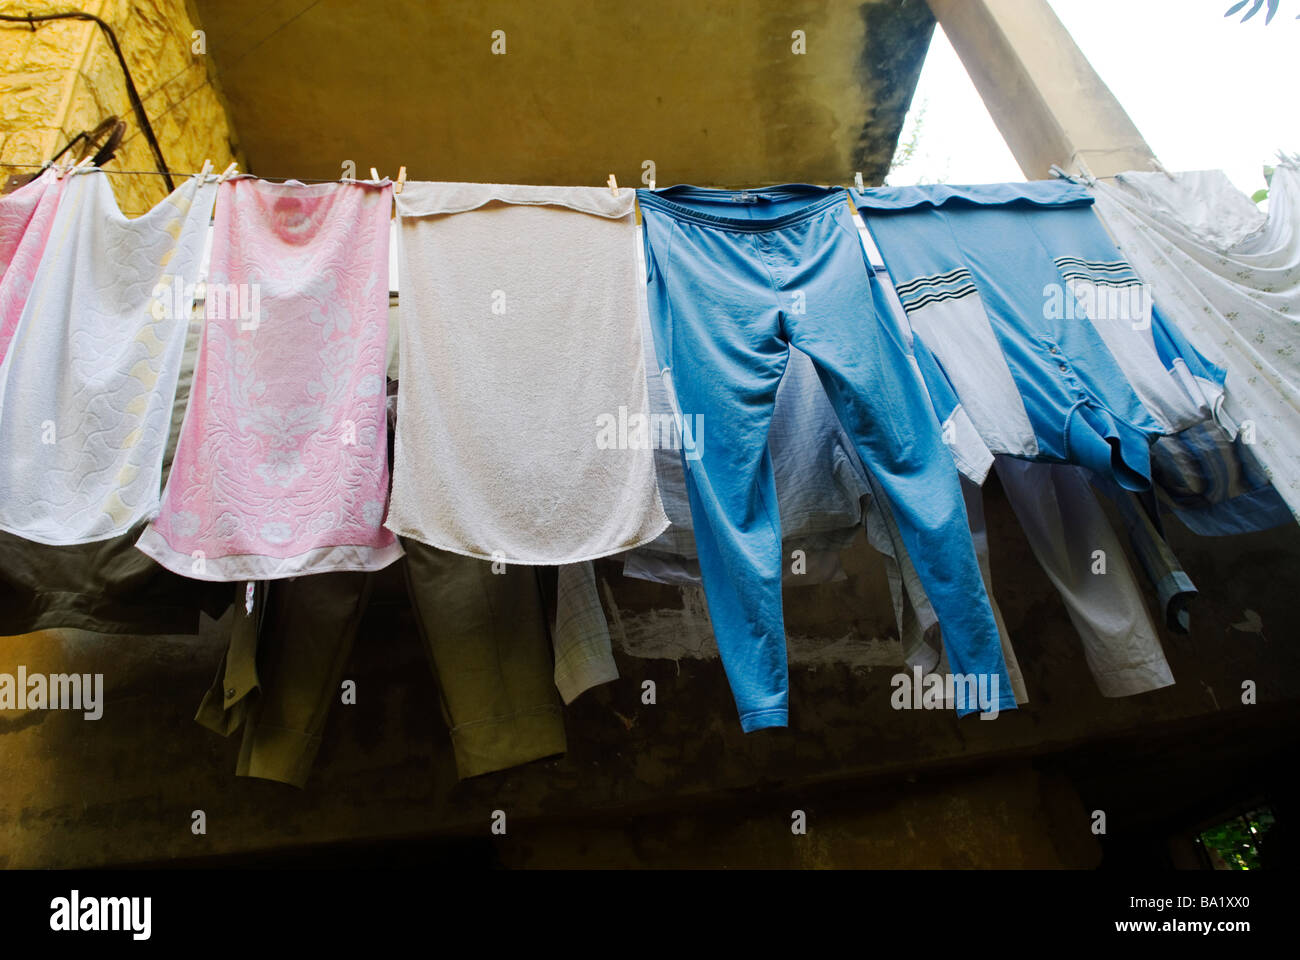 Laundry hanging to dry Lebanon Middle East Asia Stock Photo